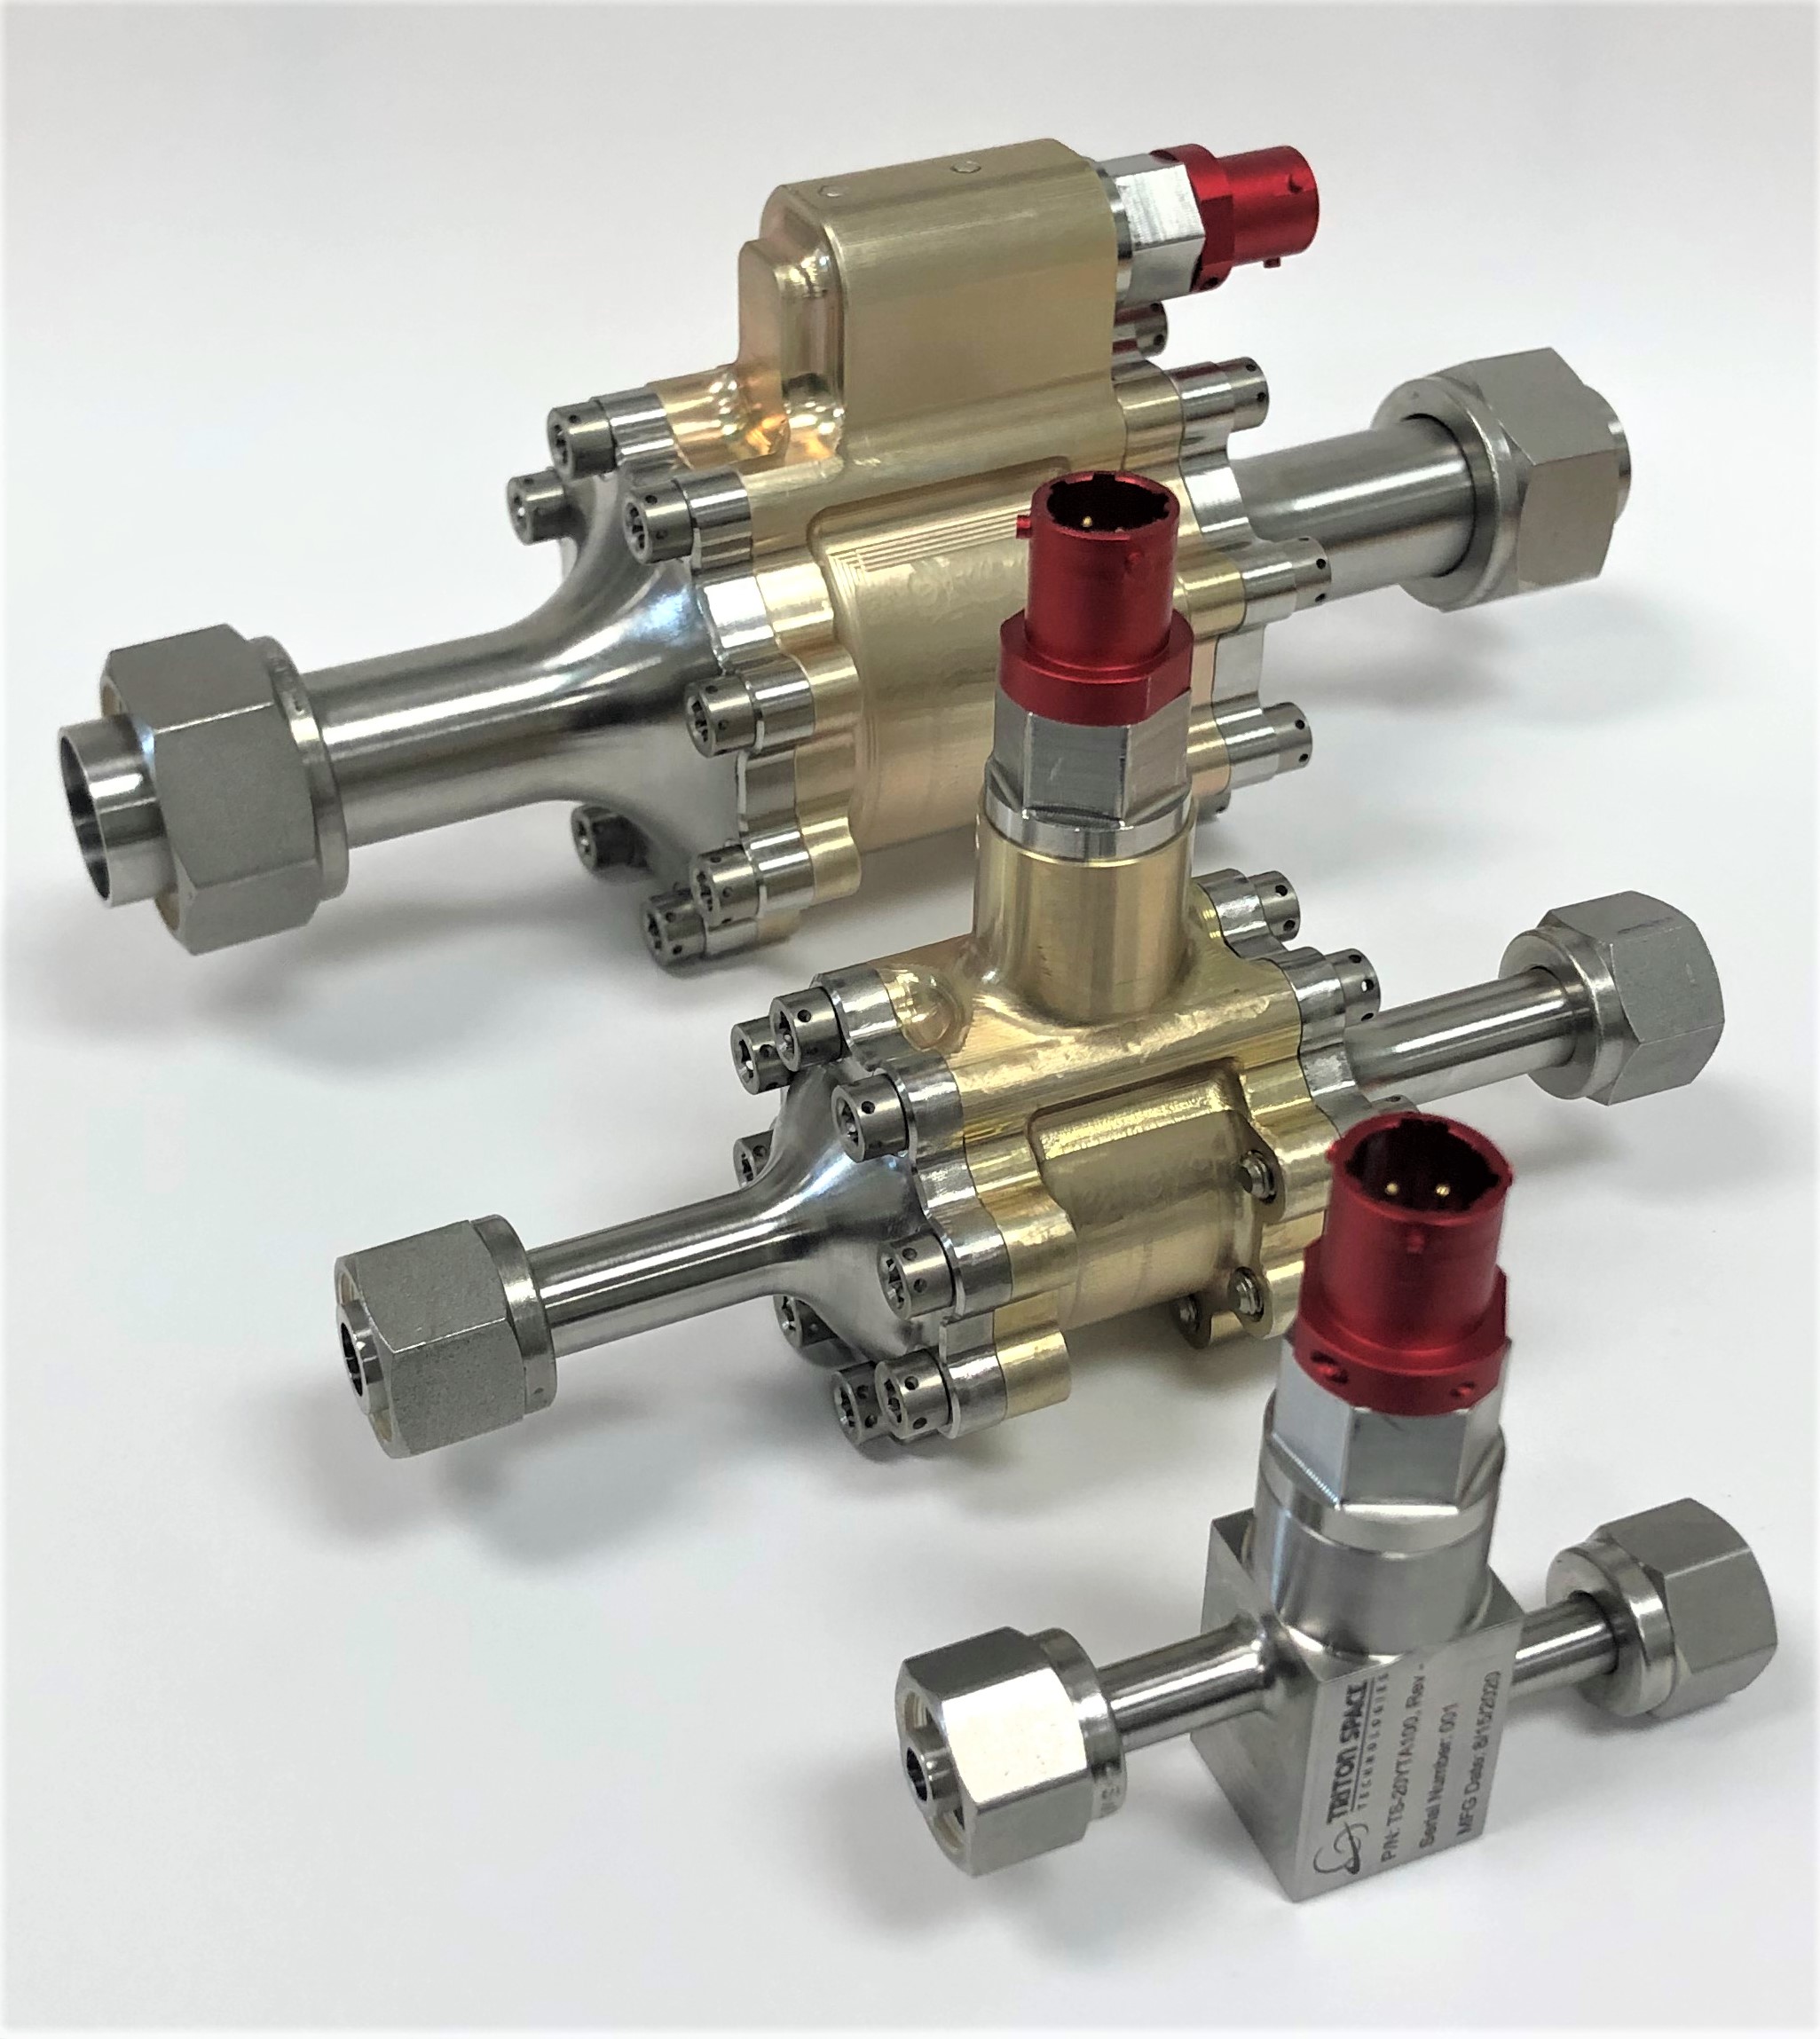 Finished valves are machined in aerospace-grade metals